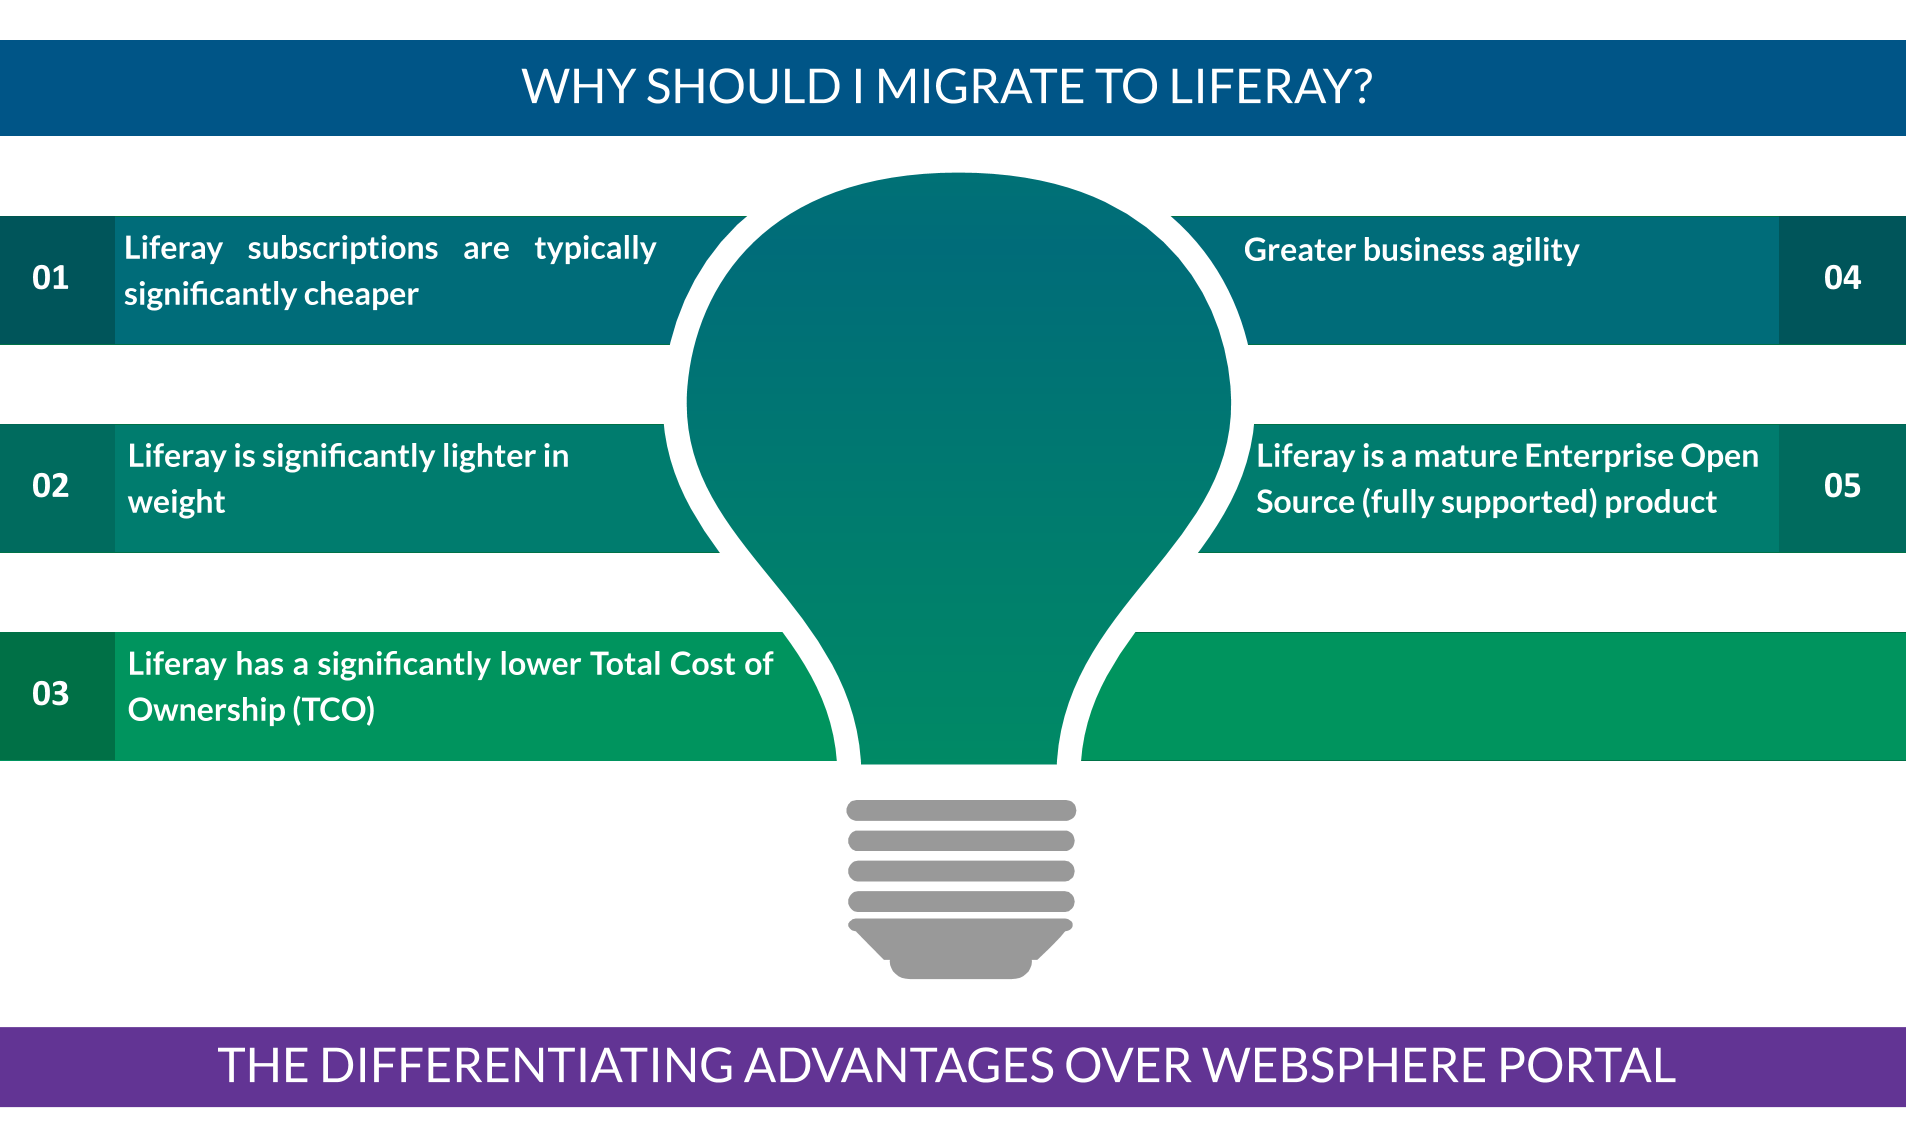 Top 5 Differences That Make Liferay the Right Alternative to WebSphere Portal